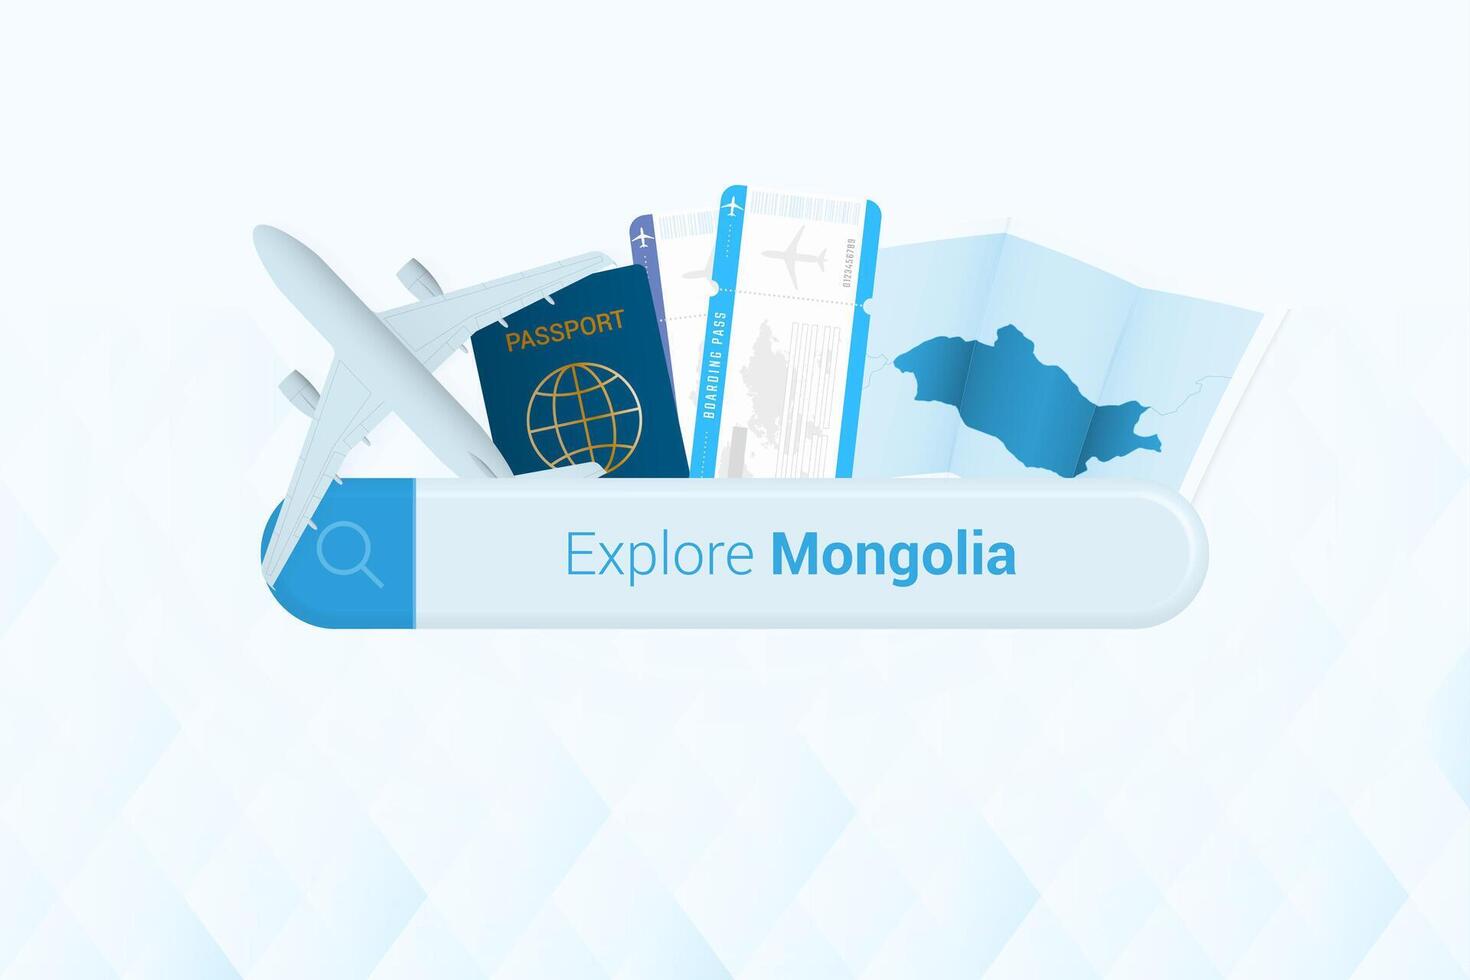 Searching tickets to Mongolia or travel destination in Mongolia. Searching bar with airplane, passport, boarding pass, tickets and map. vector